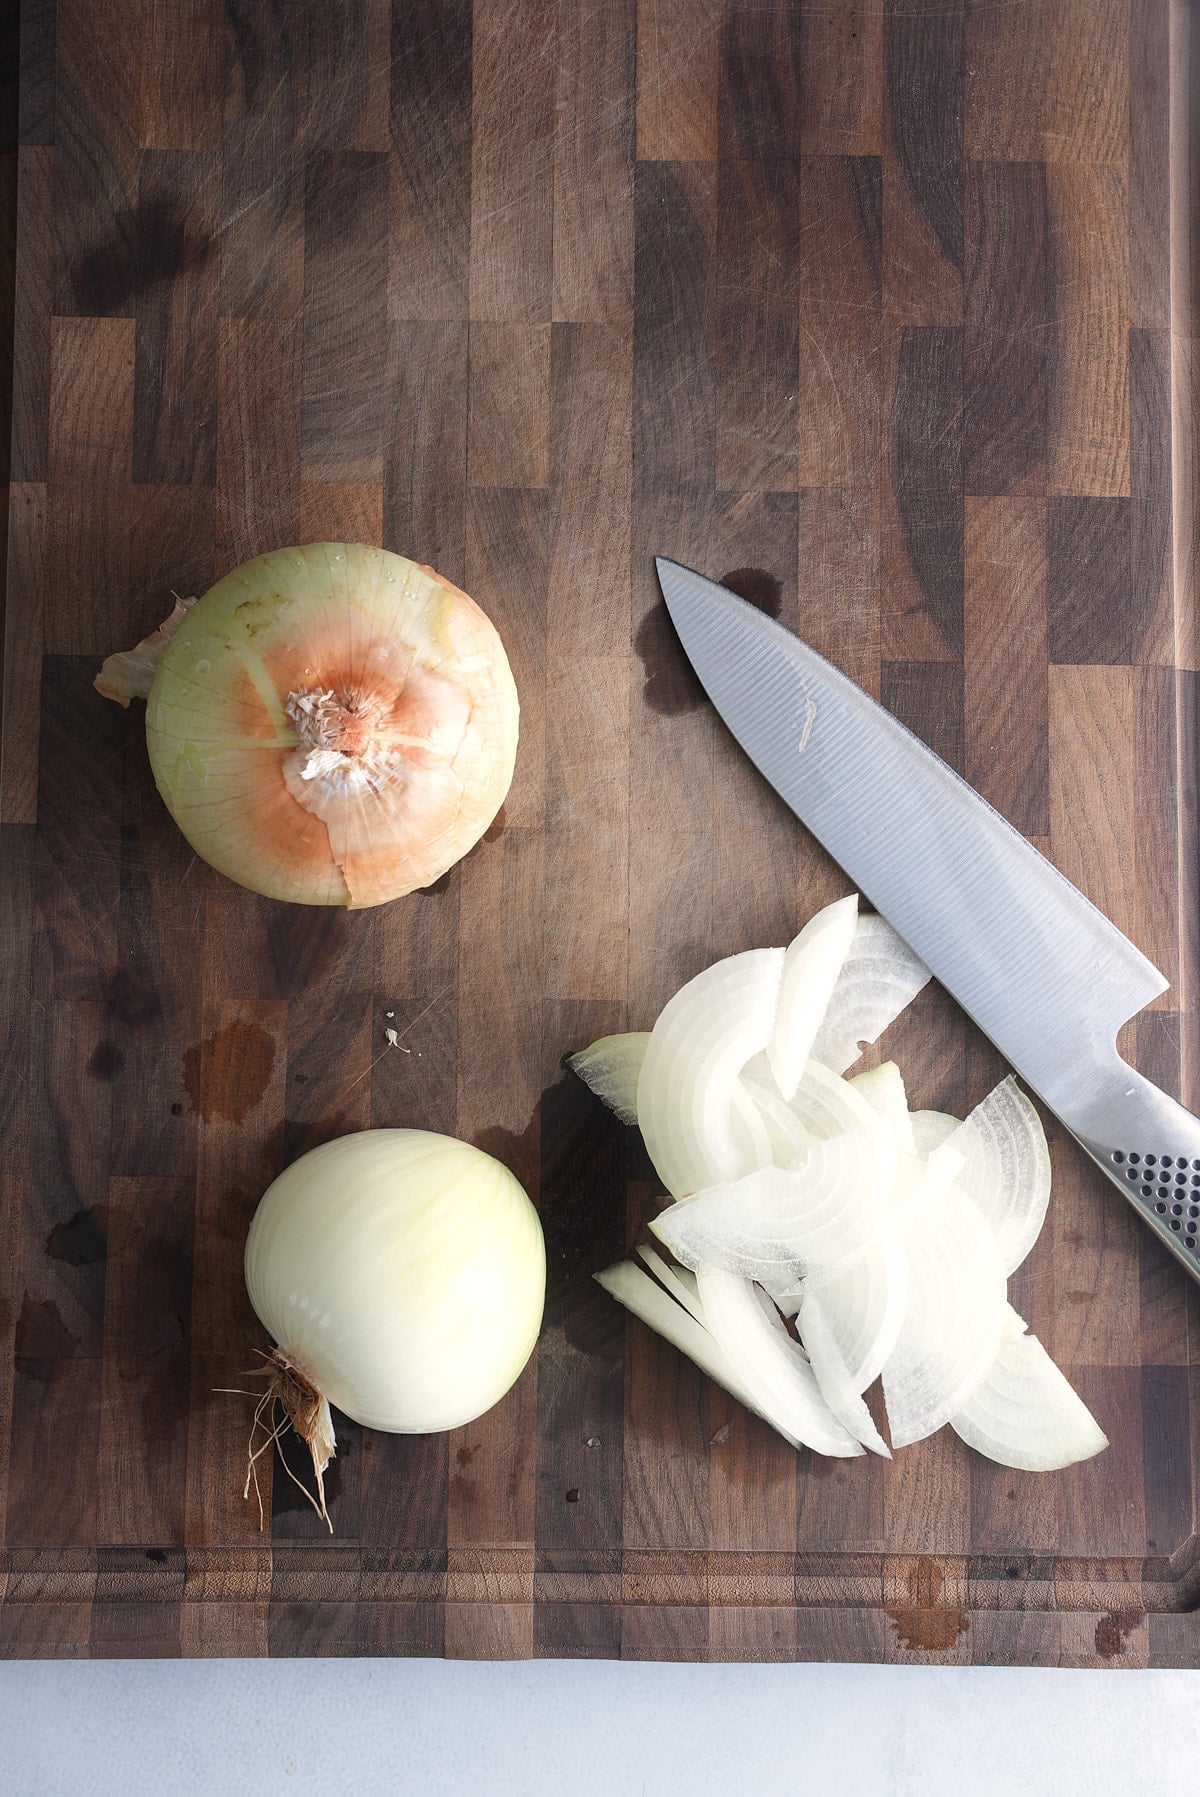 A wooden cutting board with a whole onion and a second onion being sliced with a sharp knife.